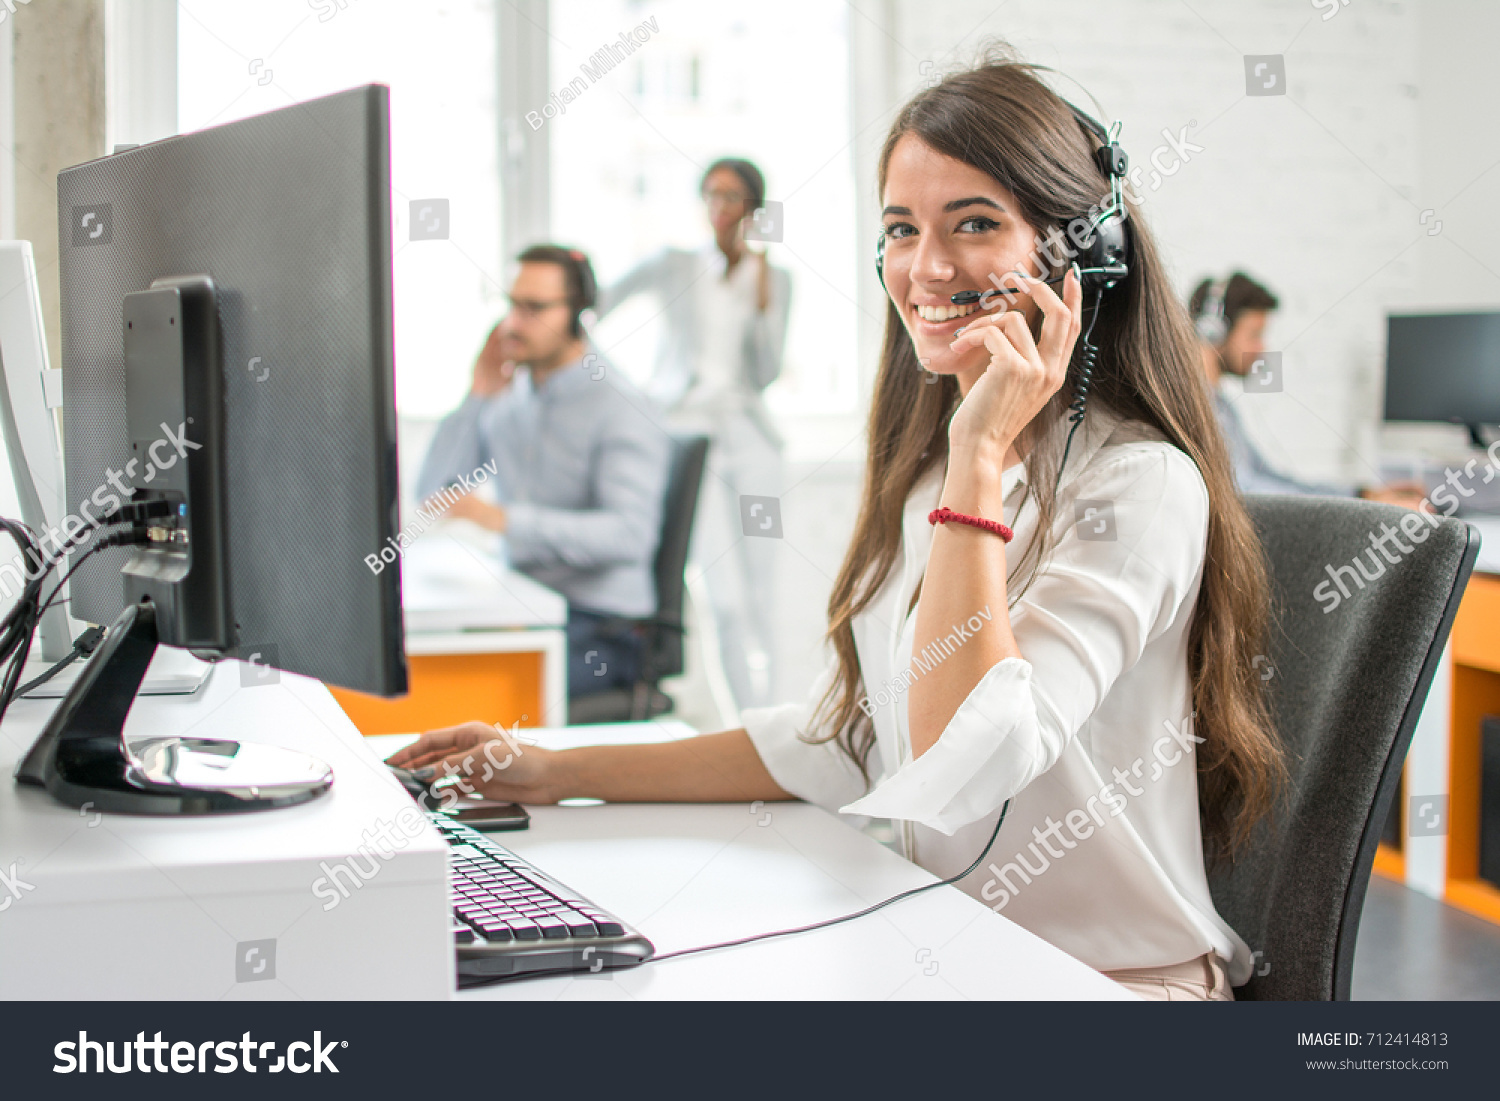 friendly-woman-operator-in-call-center